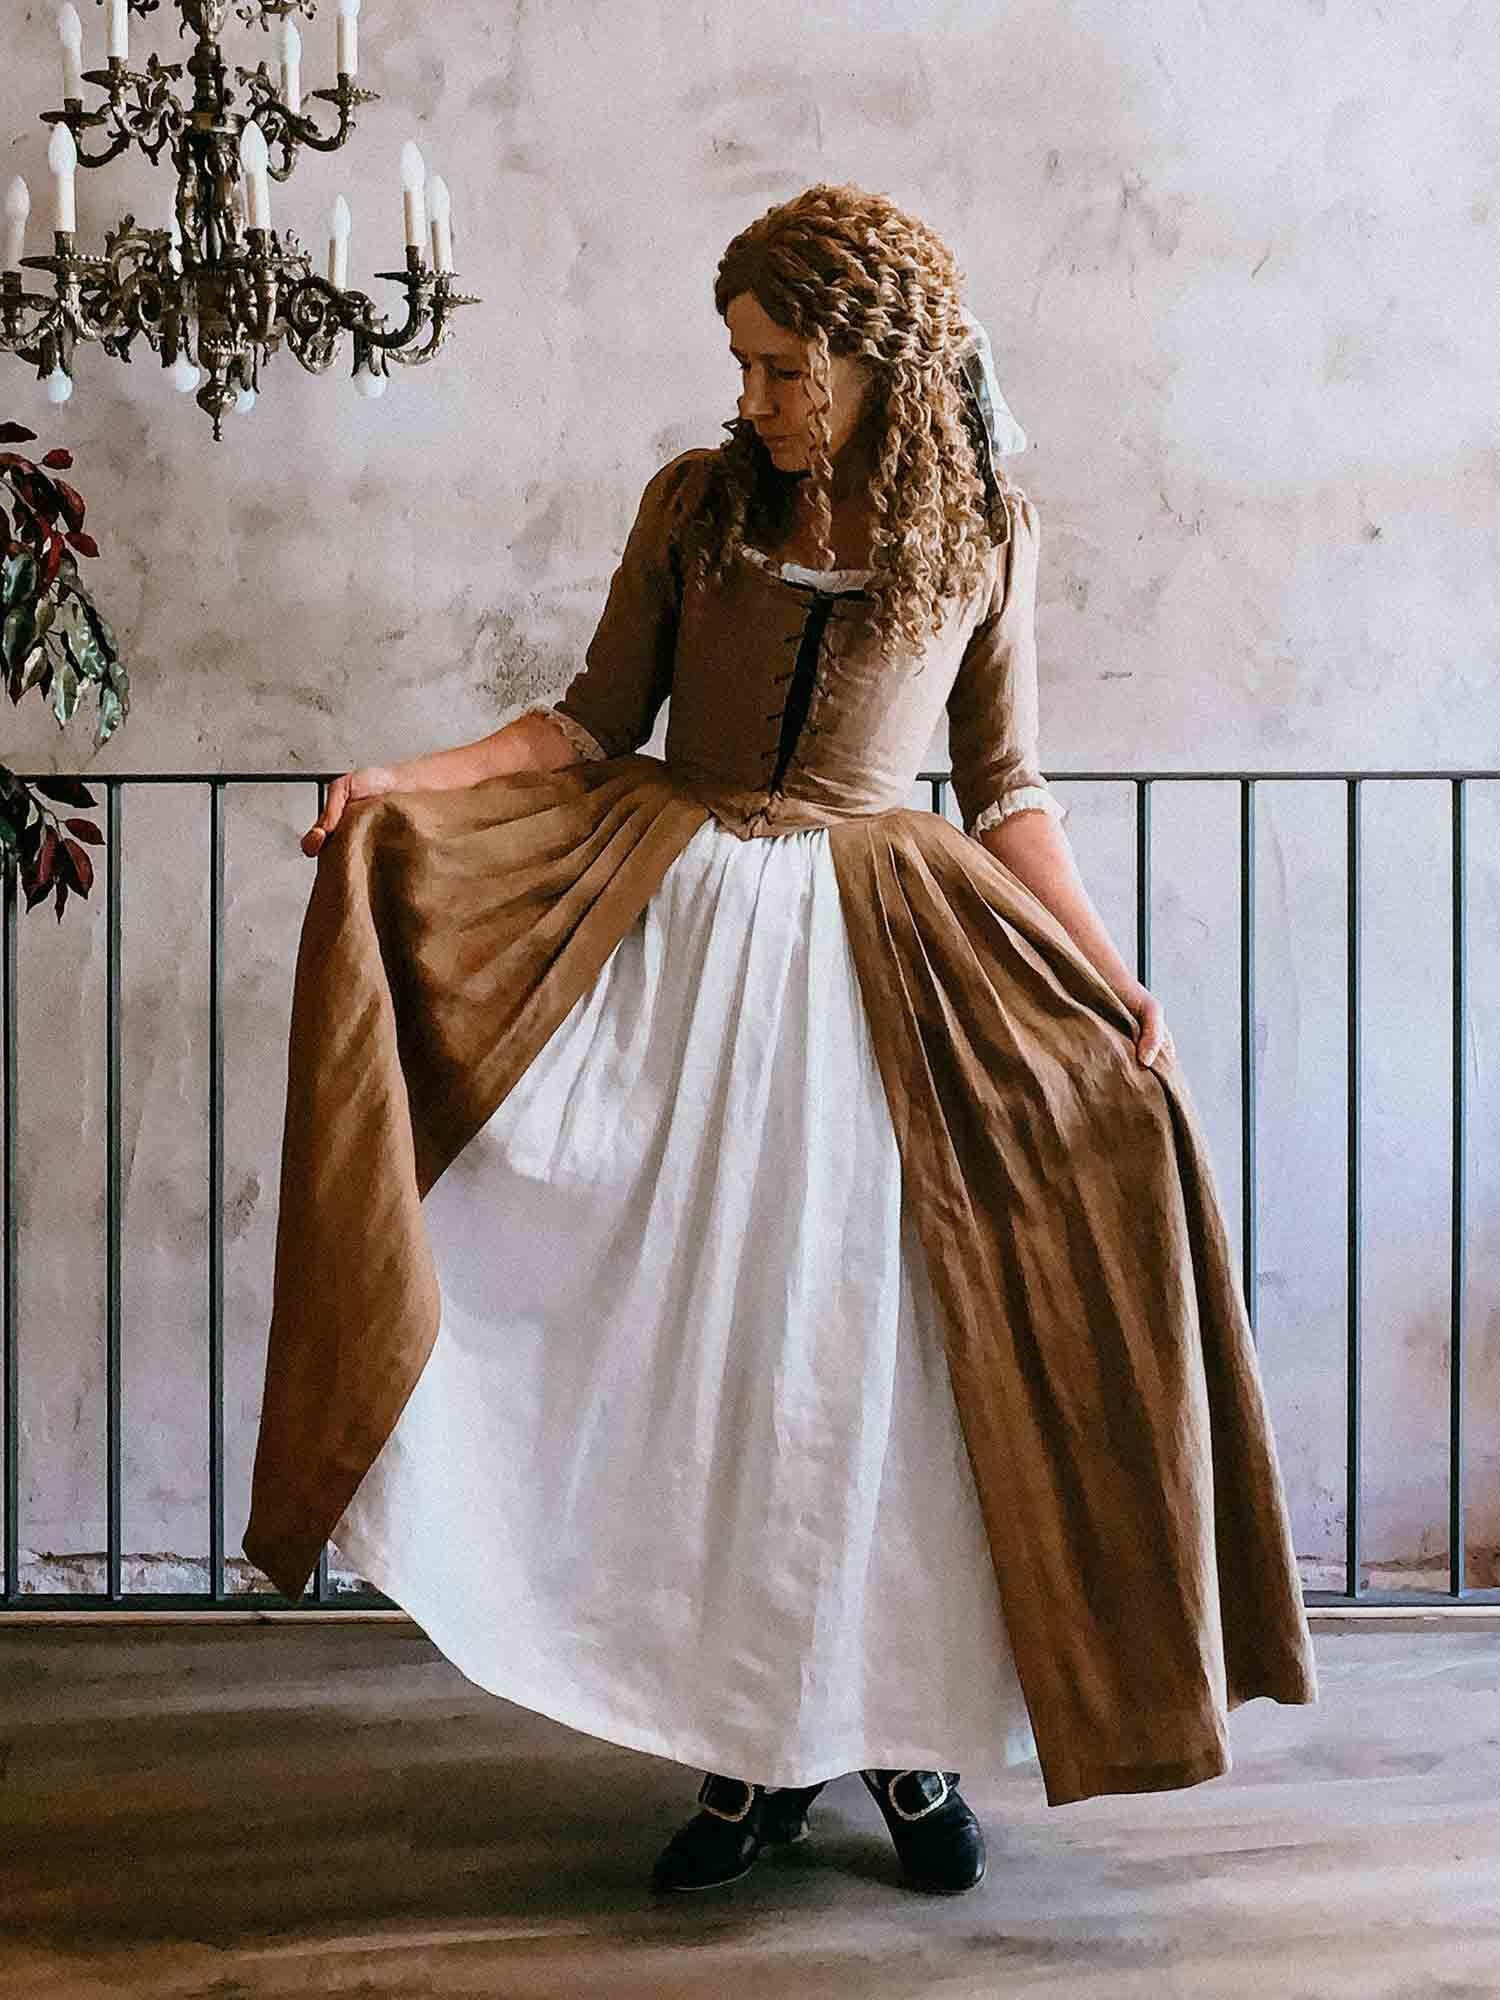 18th Century Overdress in Toffee Linen - Atelier Serraspina